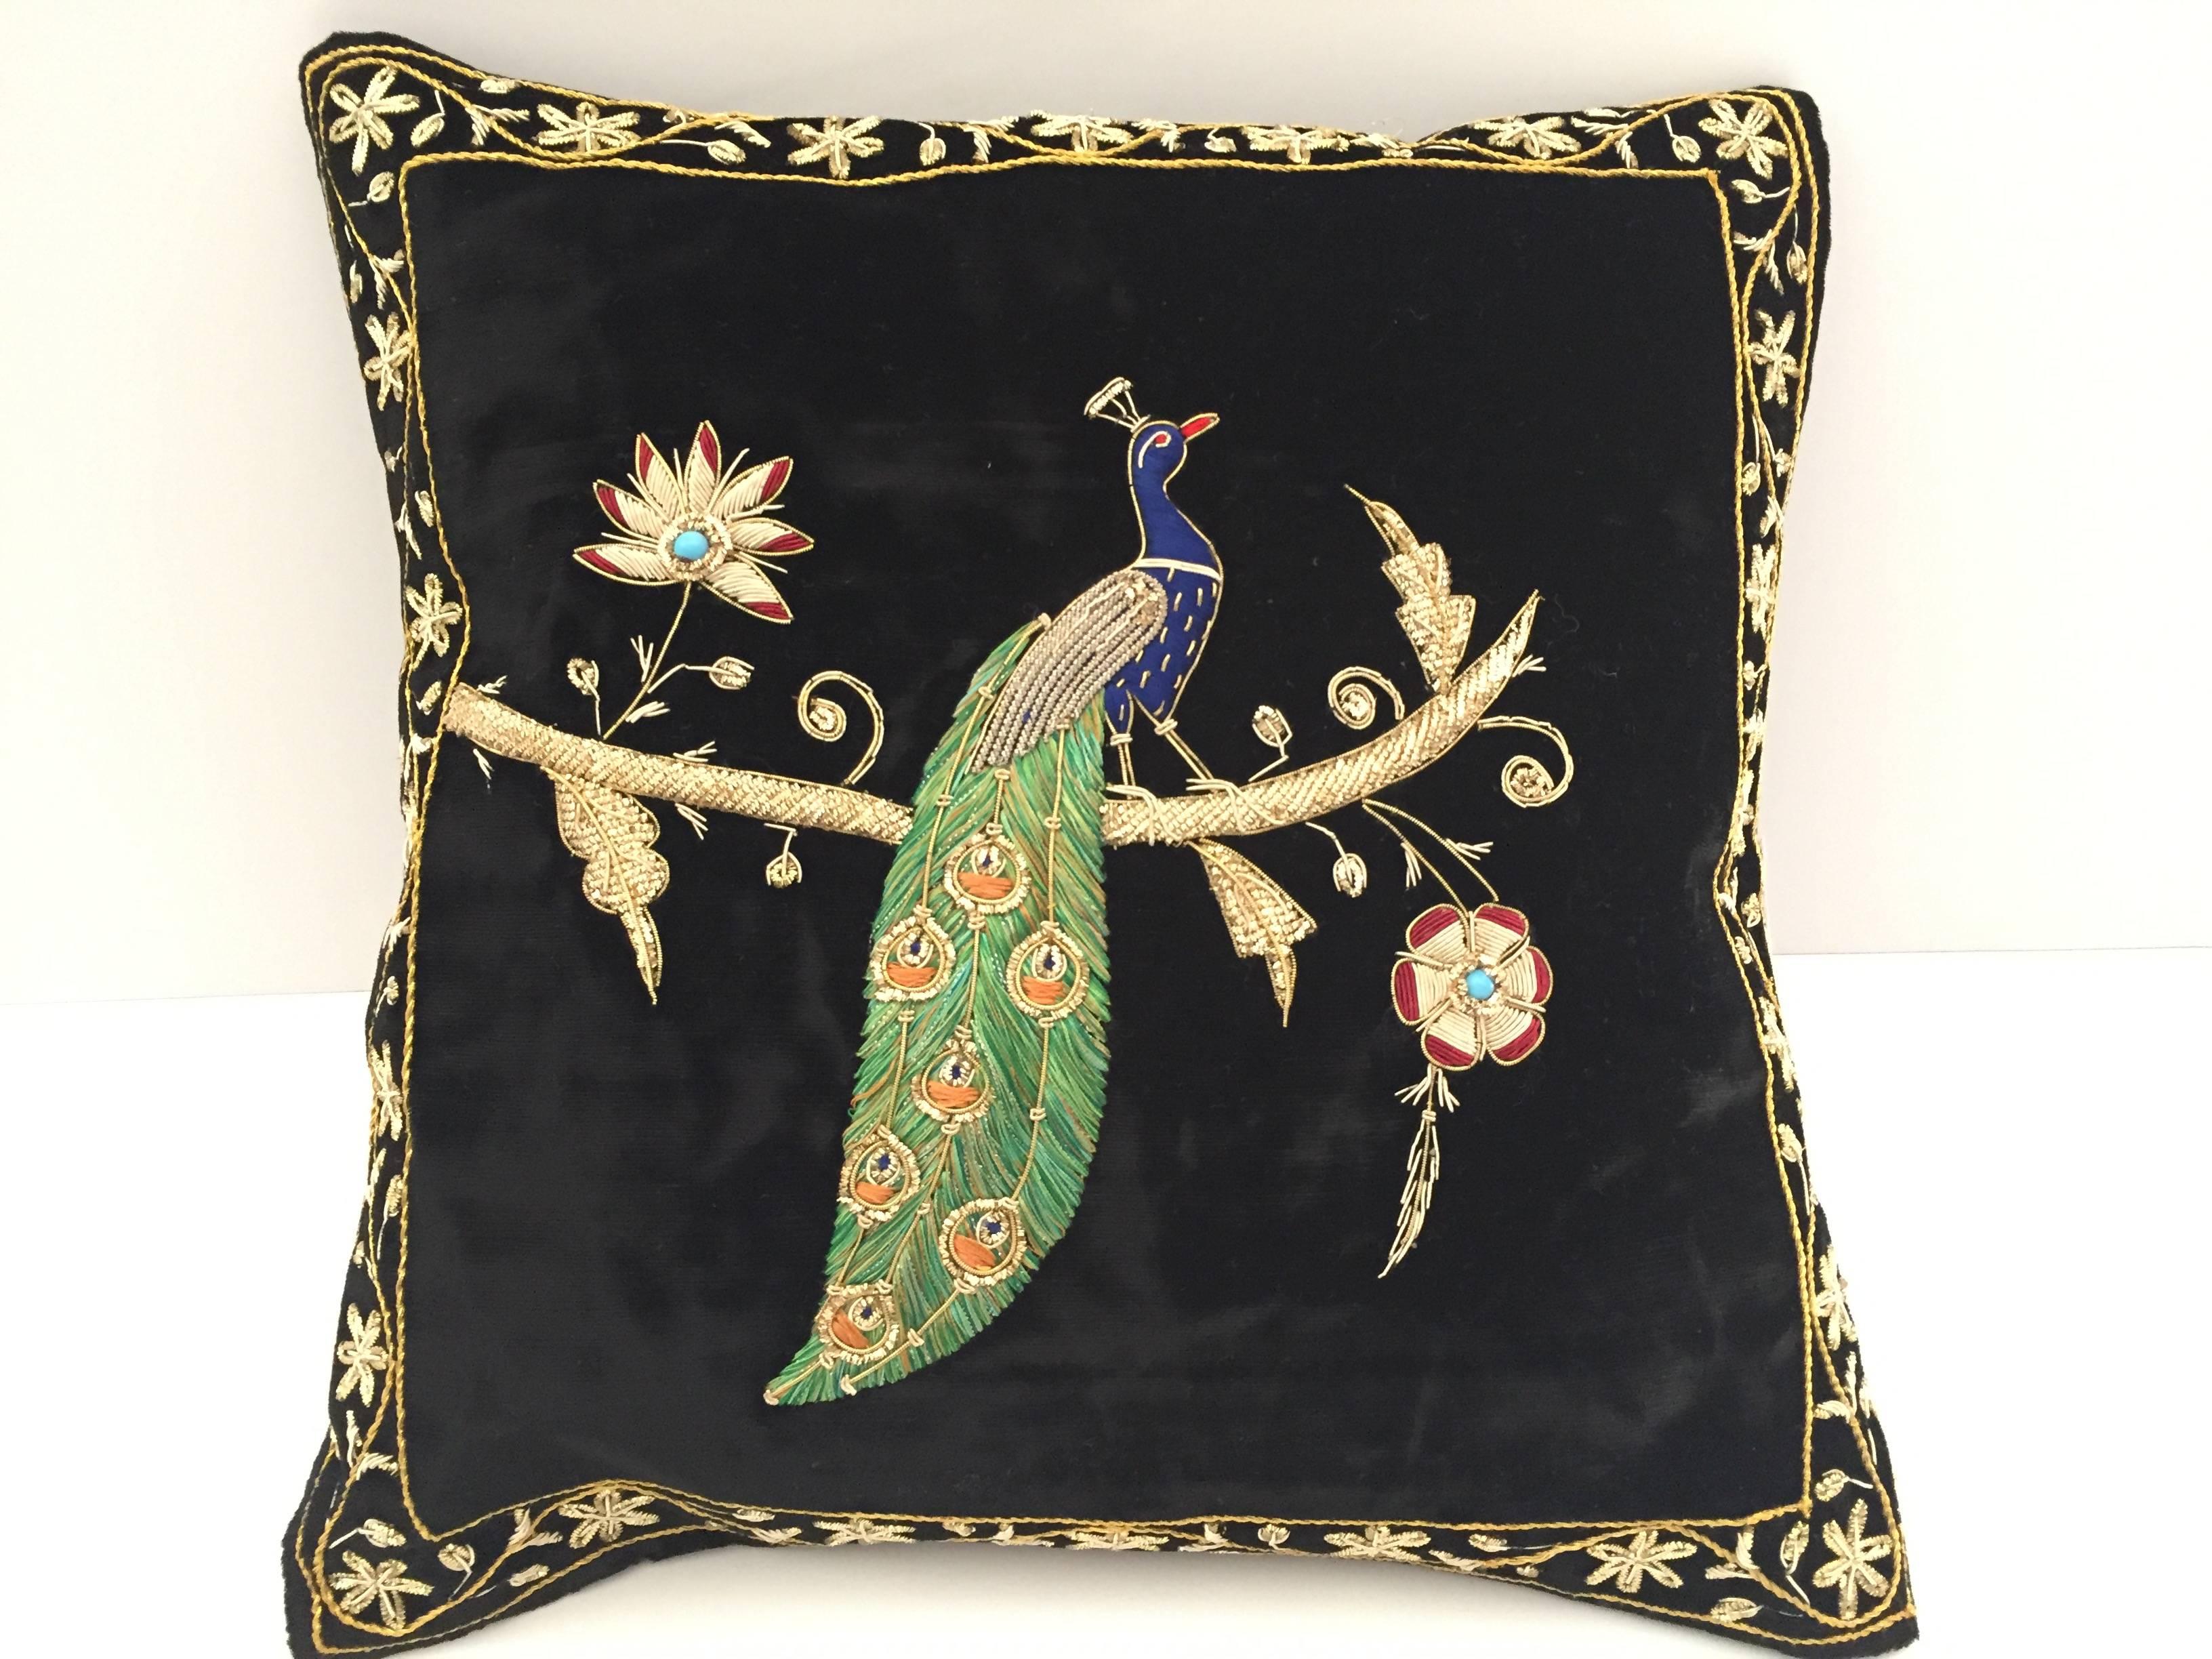 20th Century Velvet Black Silk Throw Pillow Embroidered with Gold Peacock Design